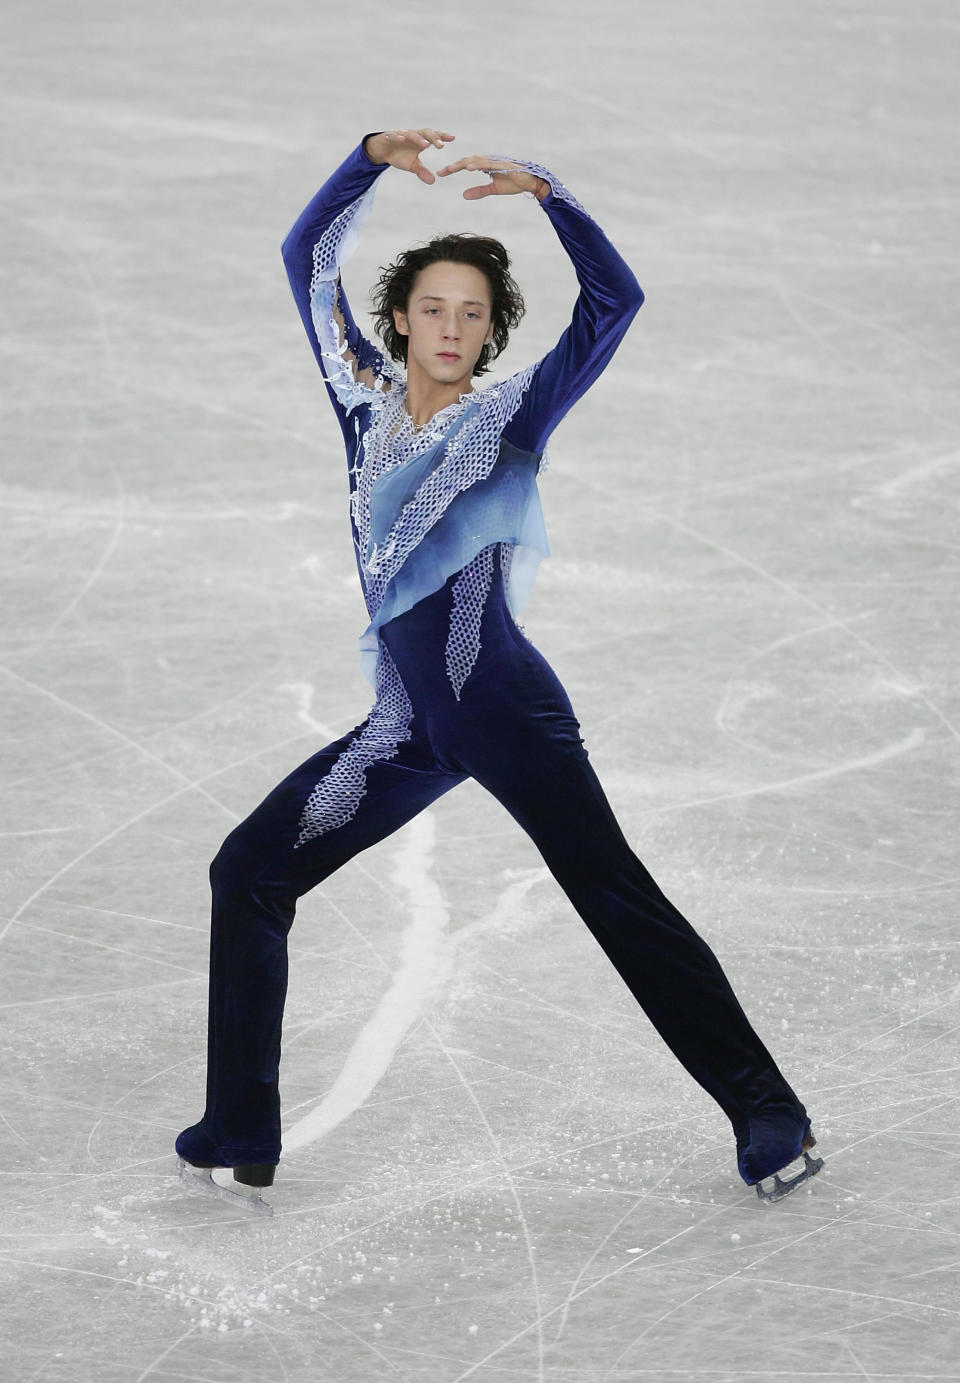 Performing&nbsp;during the men's qualifying free skate at the ISU World Figure Skating Championships at the Luzhniki Sports Palace on March 14, 2005, in Moscow.